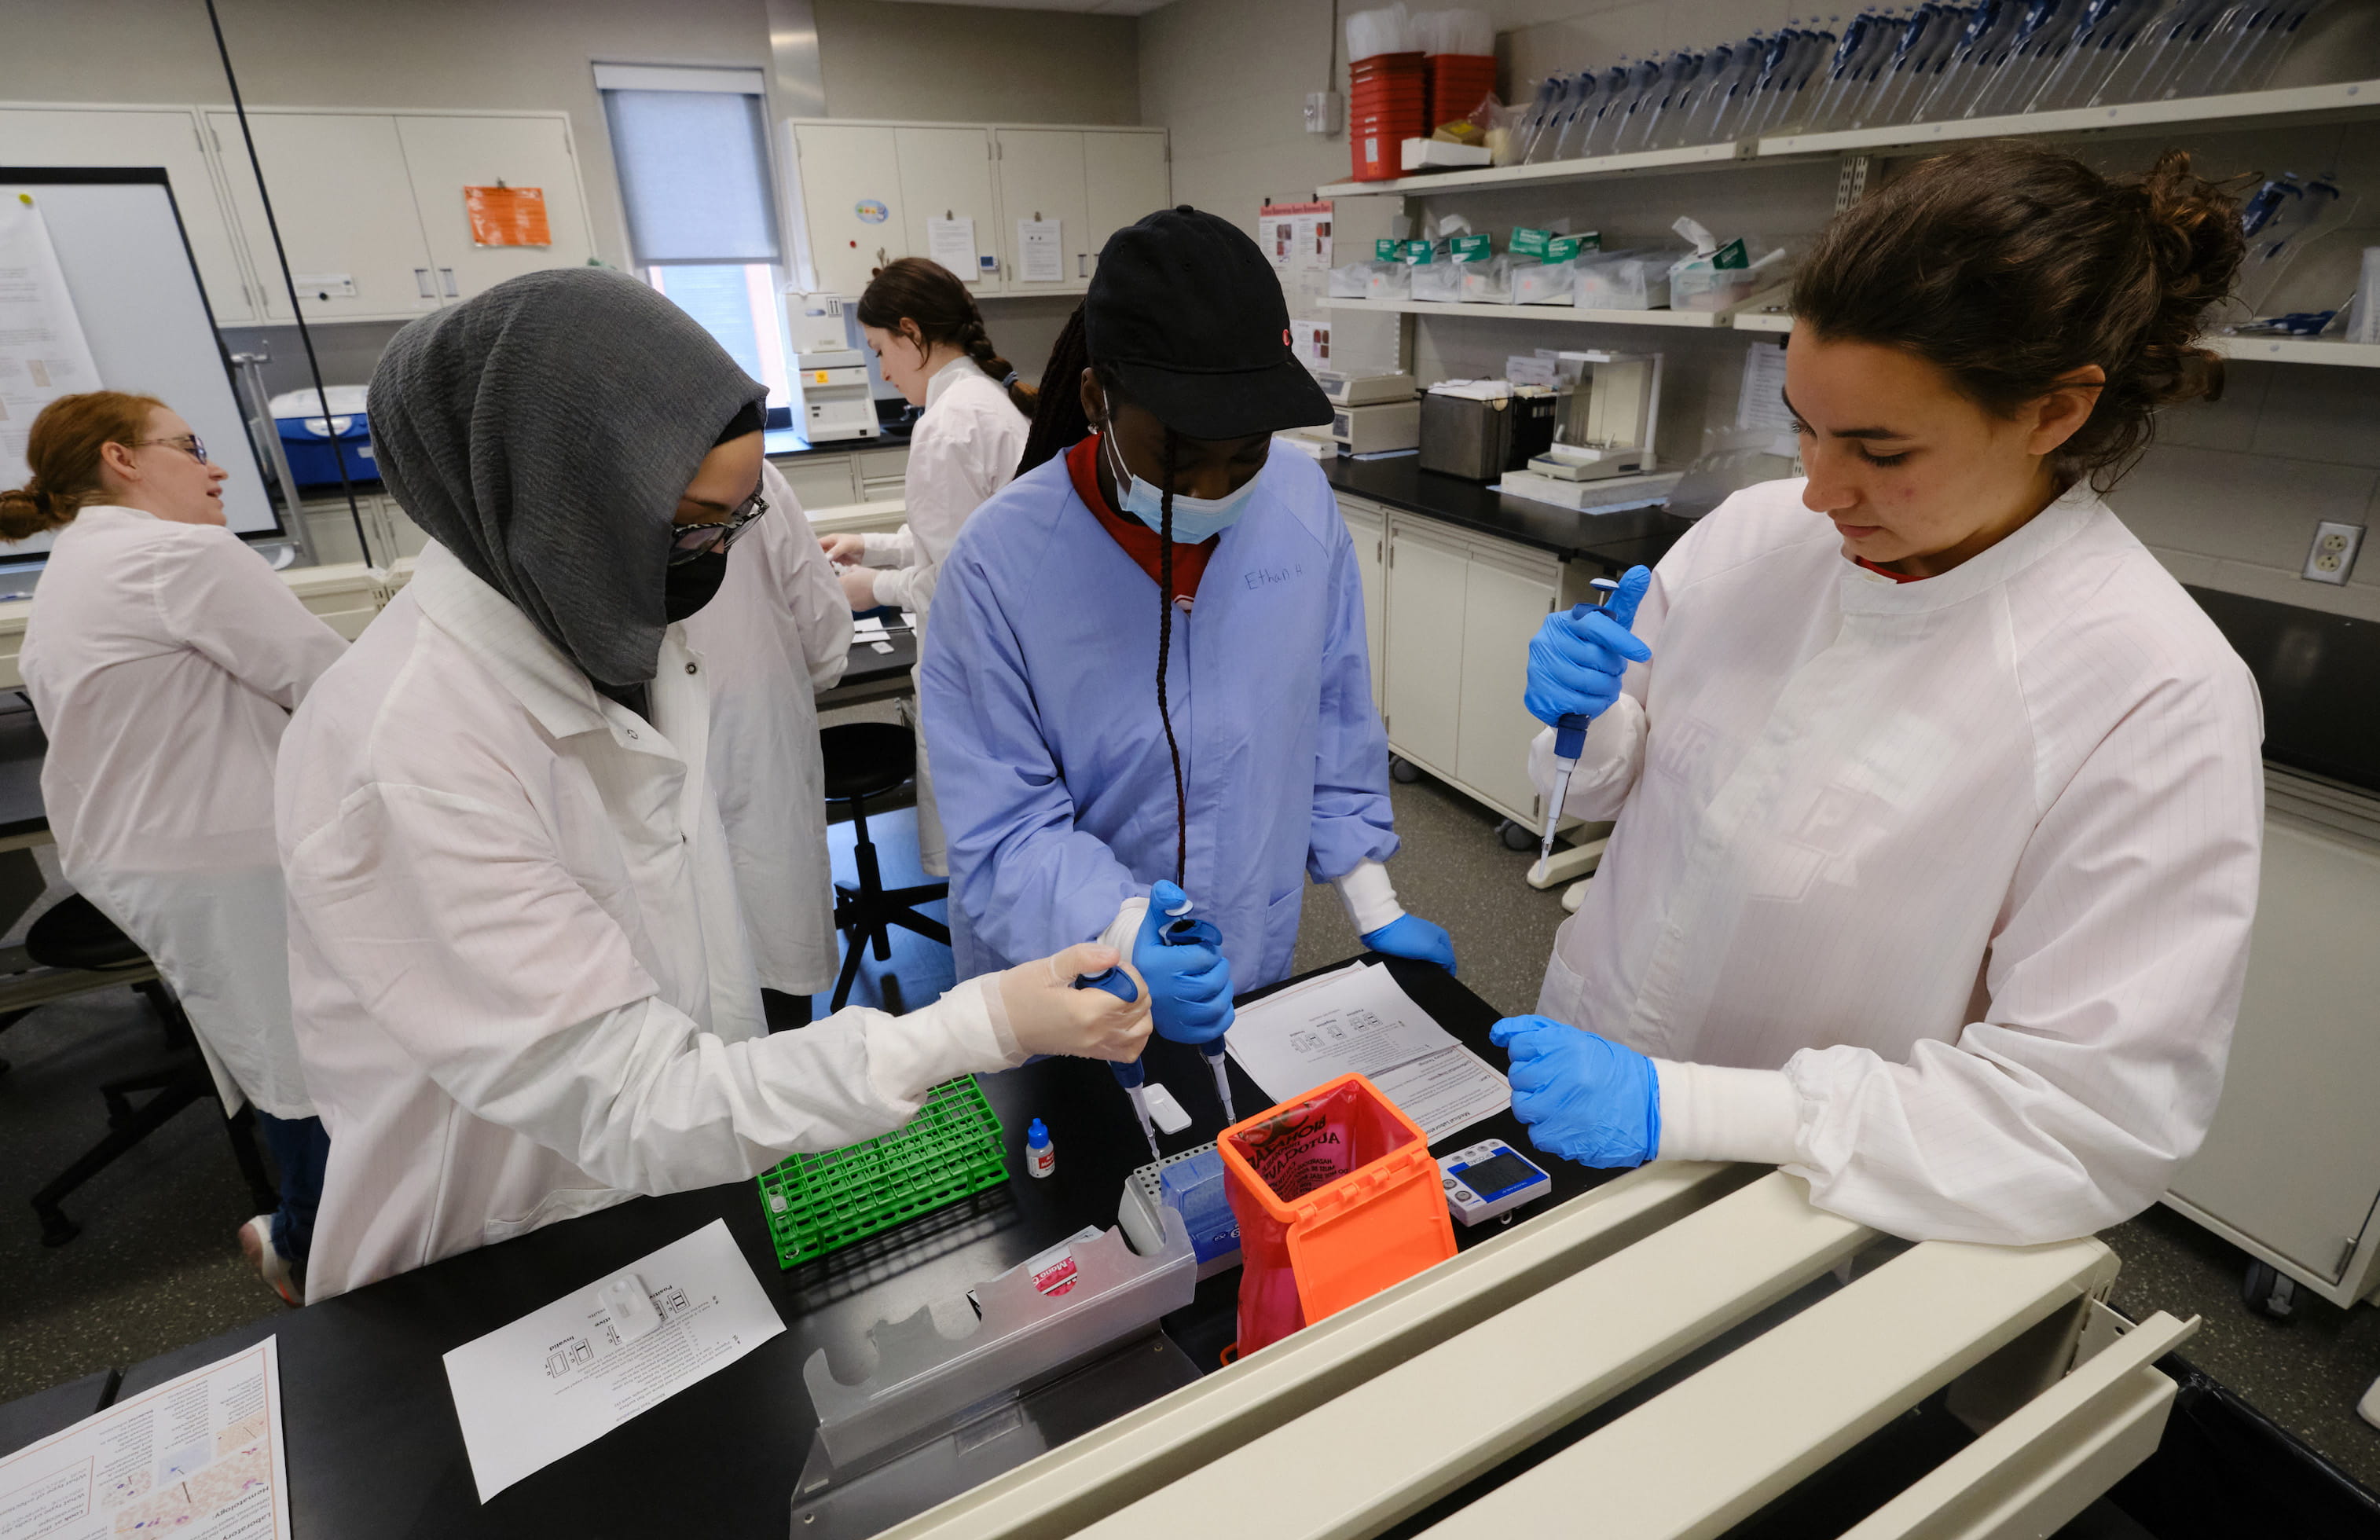 Students in lab coats using pipettes